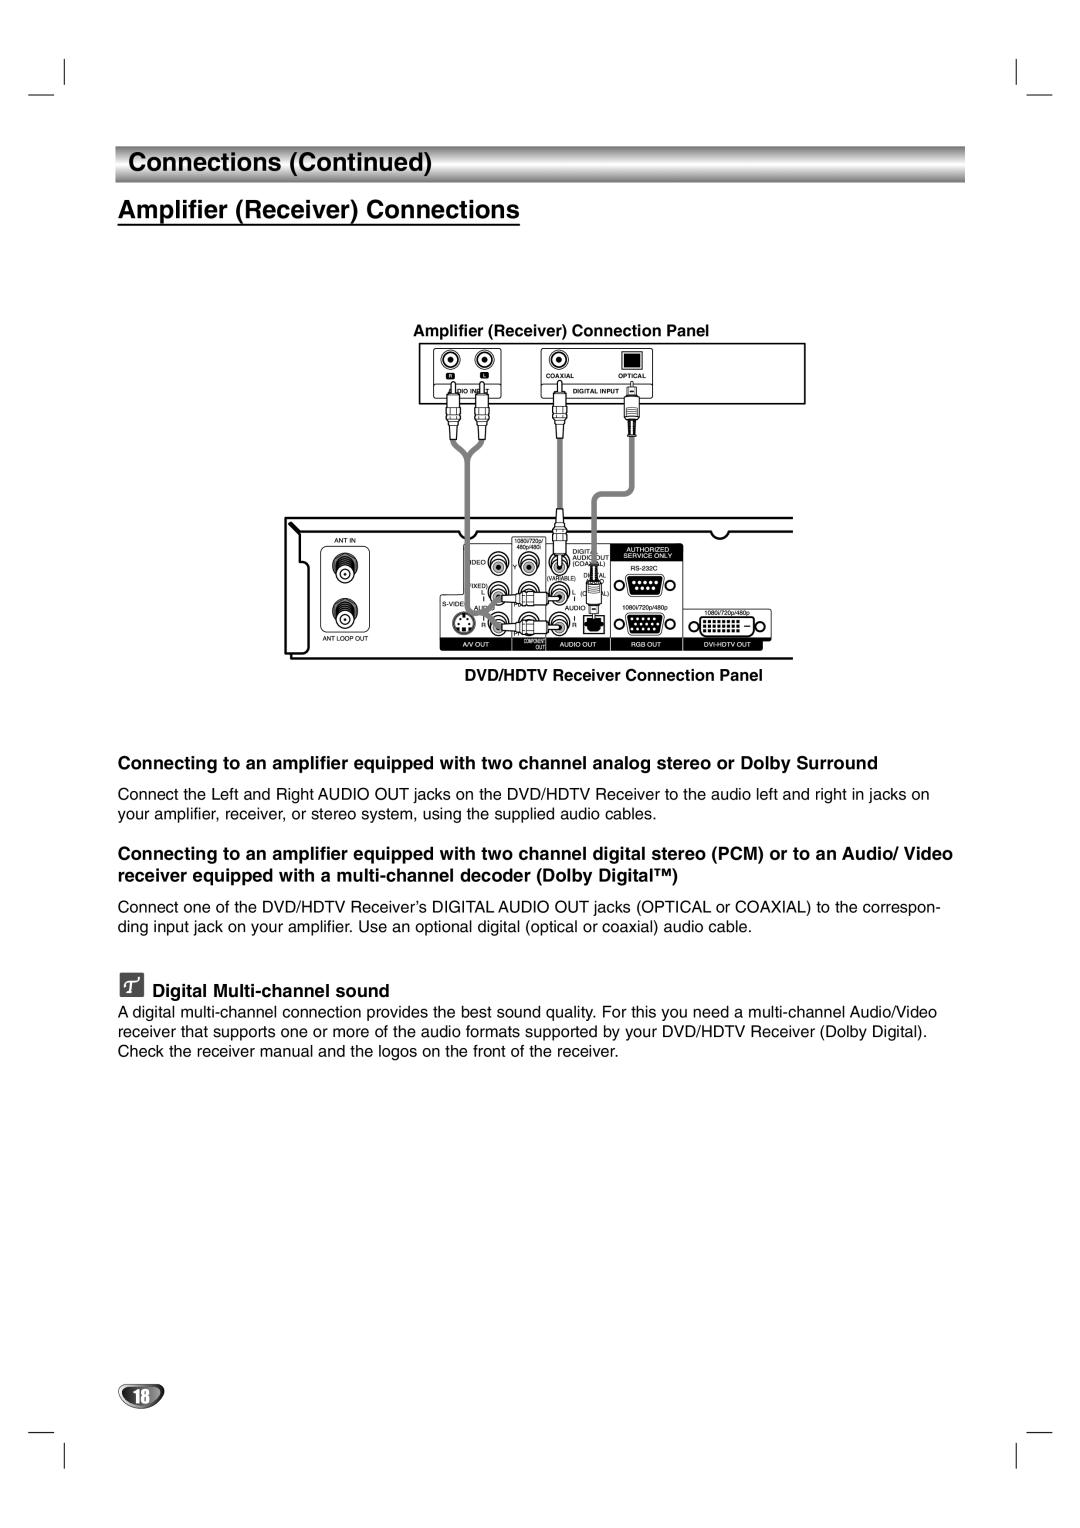 LG Electronics LST-3510A owner manual Connections Continued Amplifier Receiver Connections, Digital Multi-channel sound 